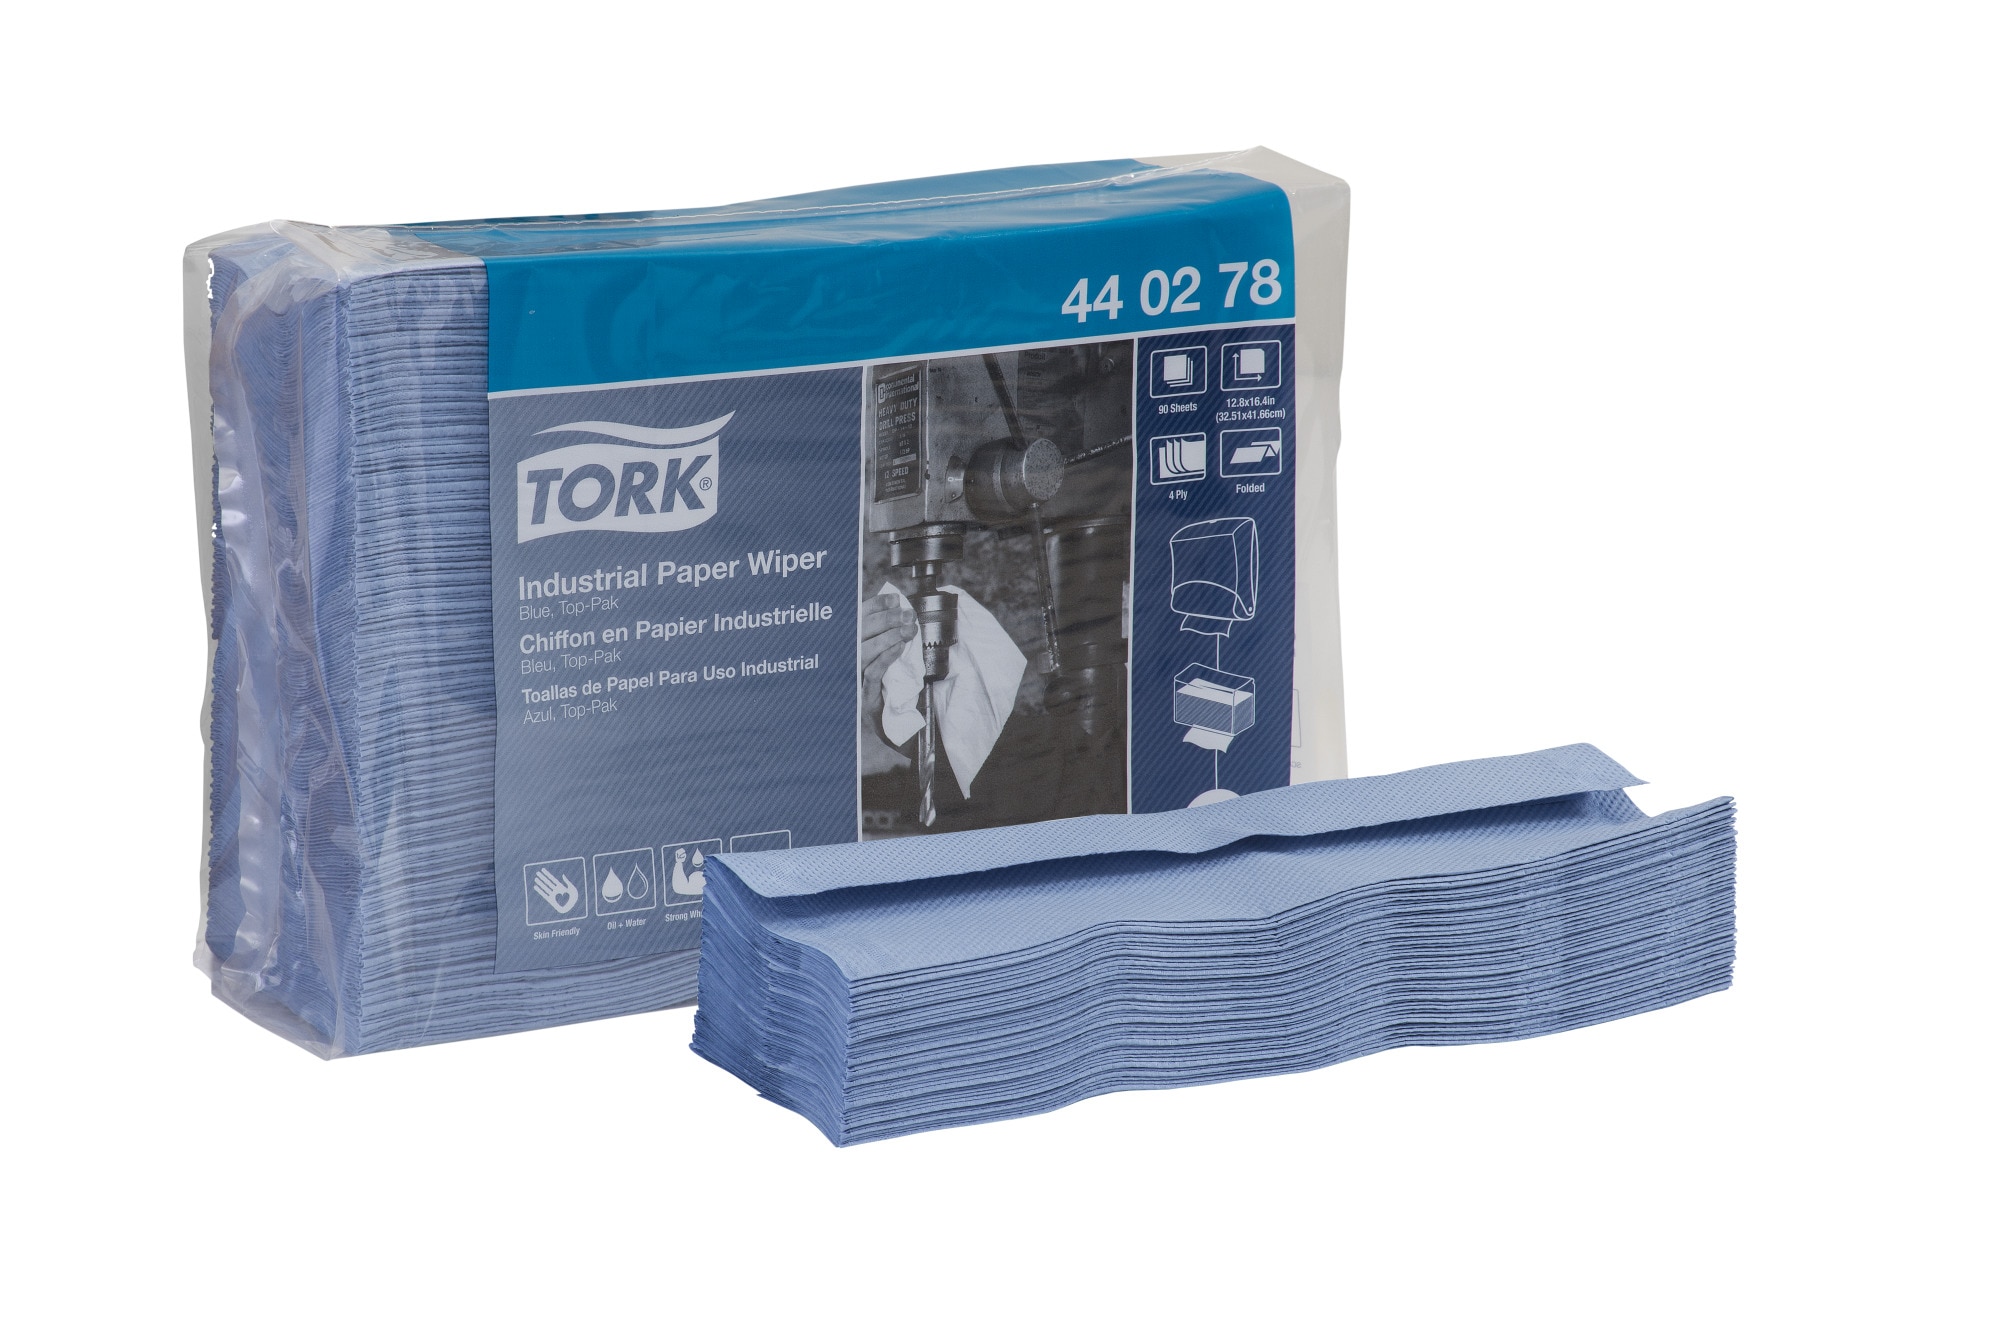 Tork Industrial Paper Wiper, Top-Pak | 440278 | Wipers and cloths 